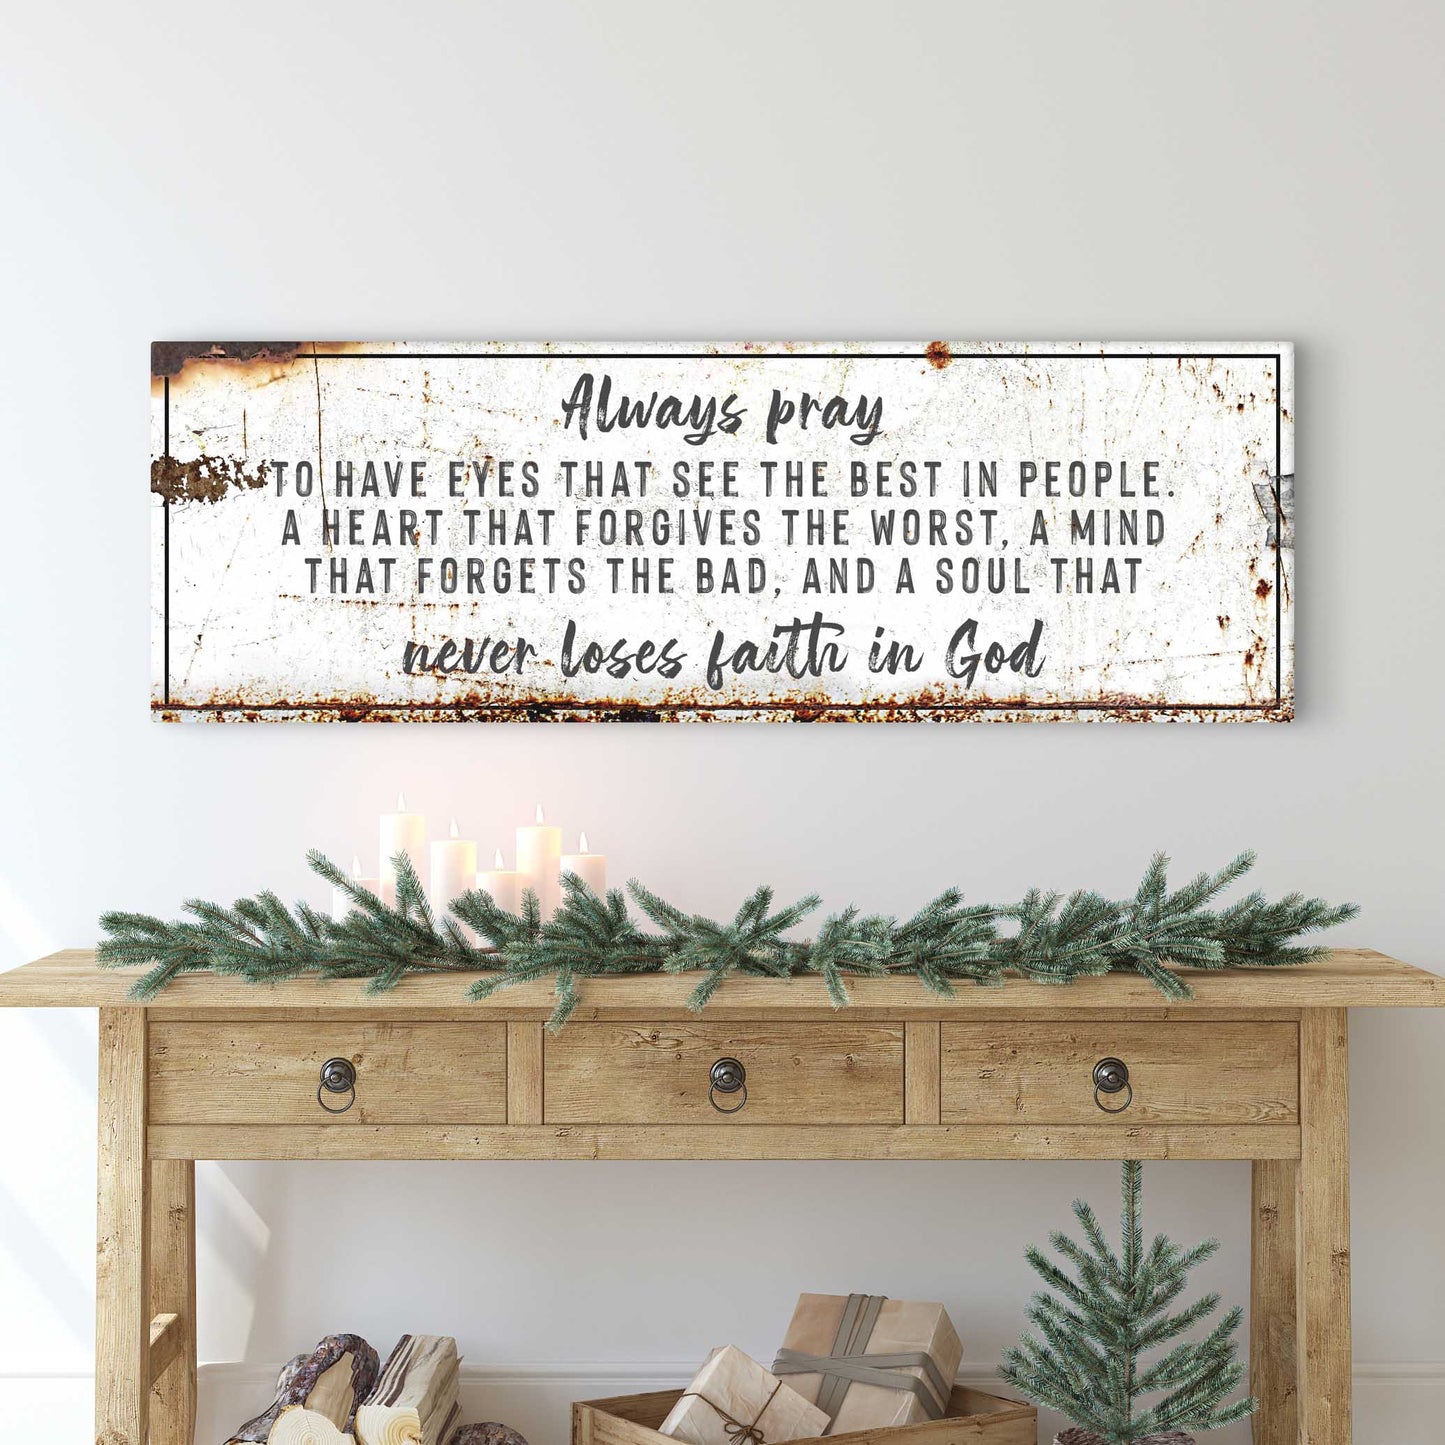 Always Pray to have eyes that see the best in people Sign - Image by Tailored Canvases